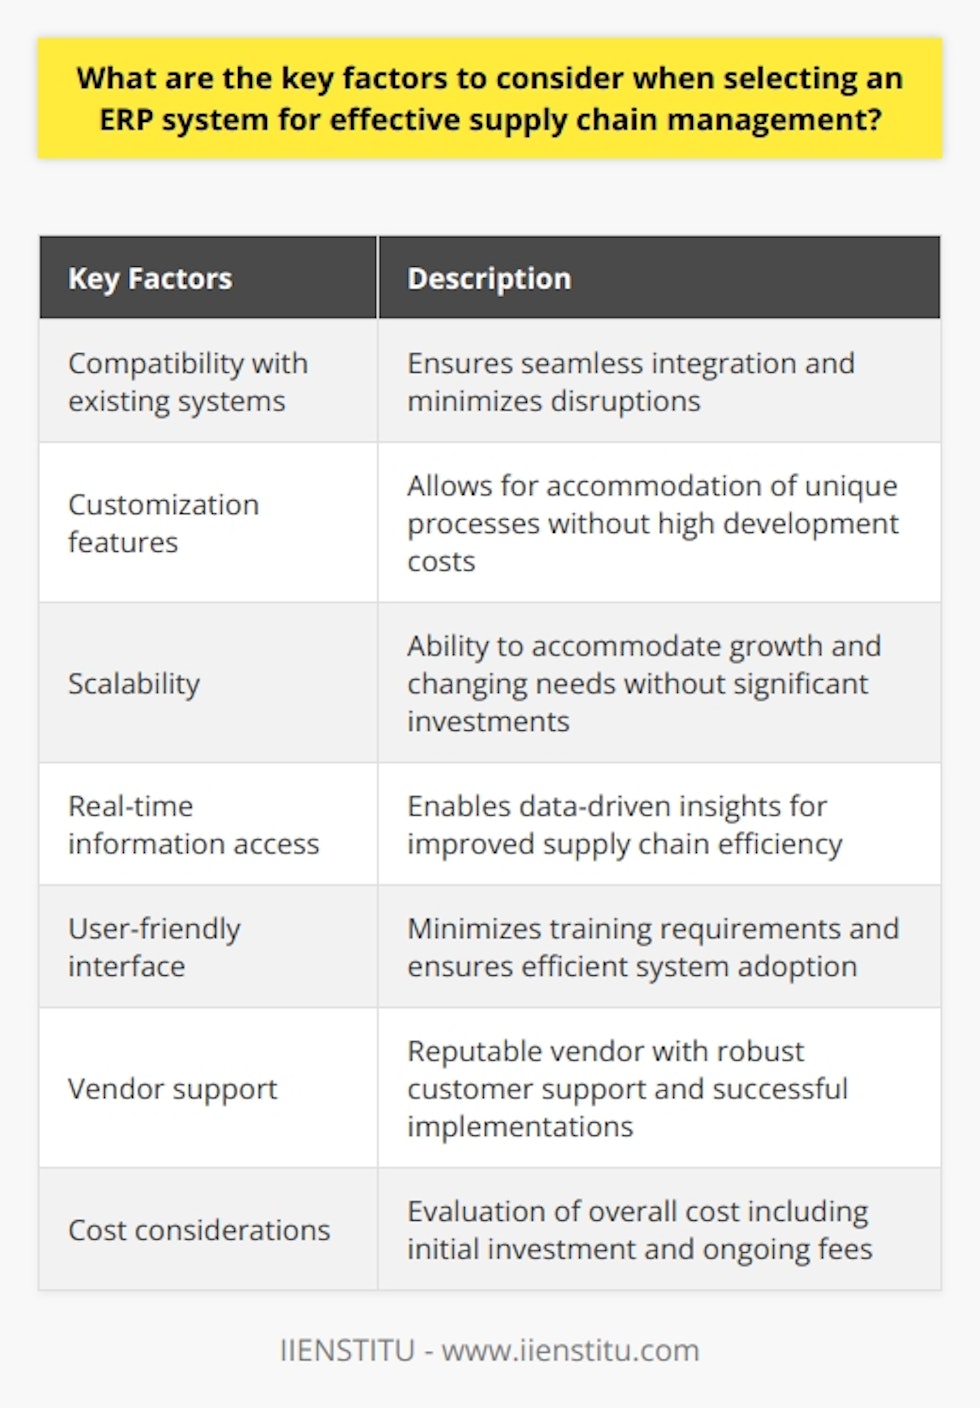 When selecting an ERP system for effective supply chain management, there are several key factors to consider. Firstly, compatibility with existing systems is crucial to ensure a seamless integration process and minimize disruptions. The chosen ERP software should be able to integrate smoothly with other systems.Secondly, customization features are important to meet the specific needs of the organization. The ERP system should allow for customization to accommodate unique processes, procedures, and requirements without incurring high development costs or long implementation times.Scalability is another key factor to consider. As a business grows and expands, the ERP software should have the capacity to accommodate this growth and changing needs without requiring significant additional investments in time, resources, or support services.Real-time information access is also essential for effective decision-making processes in supply chain management. The ERP system should support data-driven insights by enabling users to access and analyze pertinent data in real-time, improving supply chain efficiency and overall organizational performance.Having a user-friendly interface is vital as well. Supply chain managers and other users must be able to easily navigate through the software to maximize its value. A user-friendly interface will minimize training requirements and ensure quick and efficient system adoption.Vendor support is another factor to consider. The level of support provided by the ERP system vendor and their industry expertise can greatly impact the successful integration and optimization of the system within the organization. A reputable vendor with robust customer support services and a proven track record of successful implementations is crucial.Lastly, cost considerations play a significant role in selecting an ERP system. Organizations must evaluate the overall cost, including initial investment, ongoing maintenance fees, user training costs, and any additional customizations needed. The chosen ERP system should provide adequate corporate value and return on investment while fitting within the organization's budget constraints.In conclusion, when selecting an ERP system for effective supply chain management, it is important to consider factors such as system compatibility, customization features, scalability, real-time information access, user-friendliness, vendor support, and cost. By carefully evaluating these factors, organizations can choose the right ERP software that will optimize their supply chain operations and support continued growth and success.